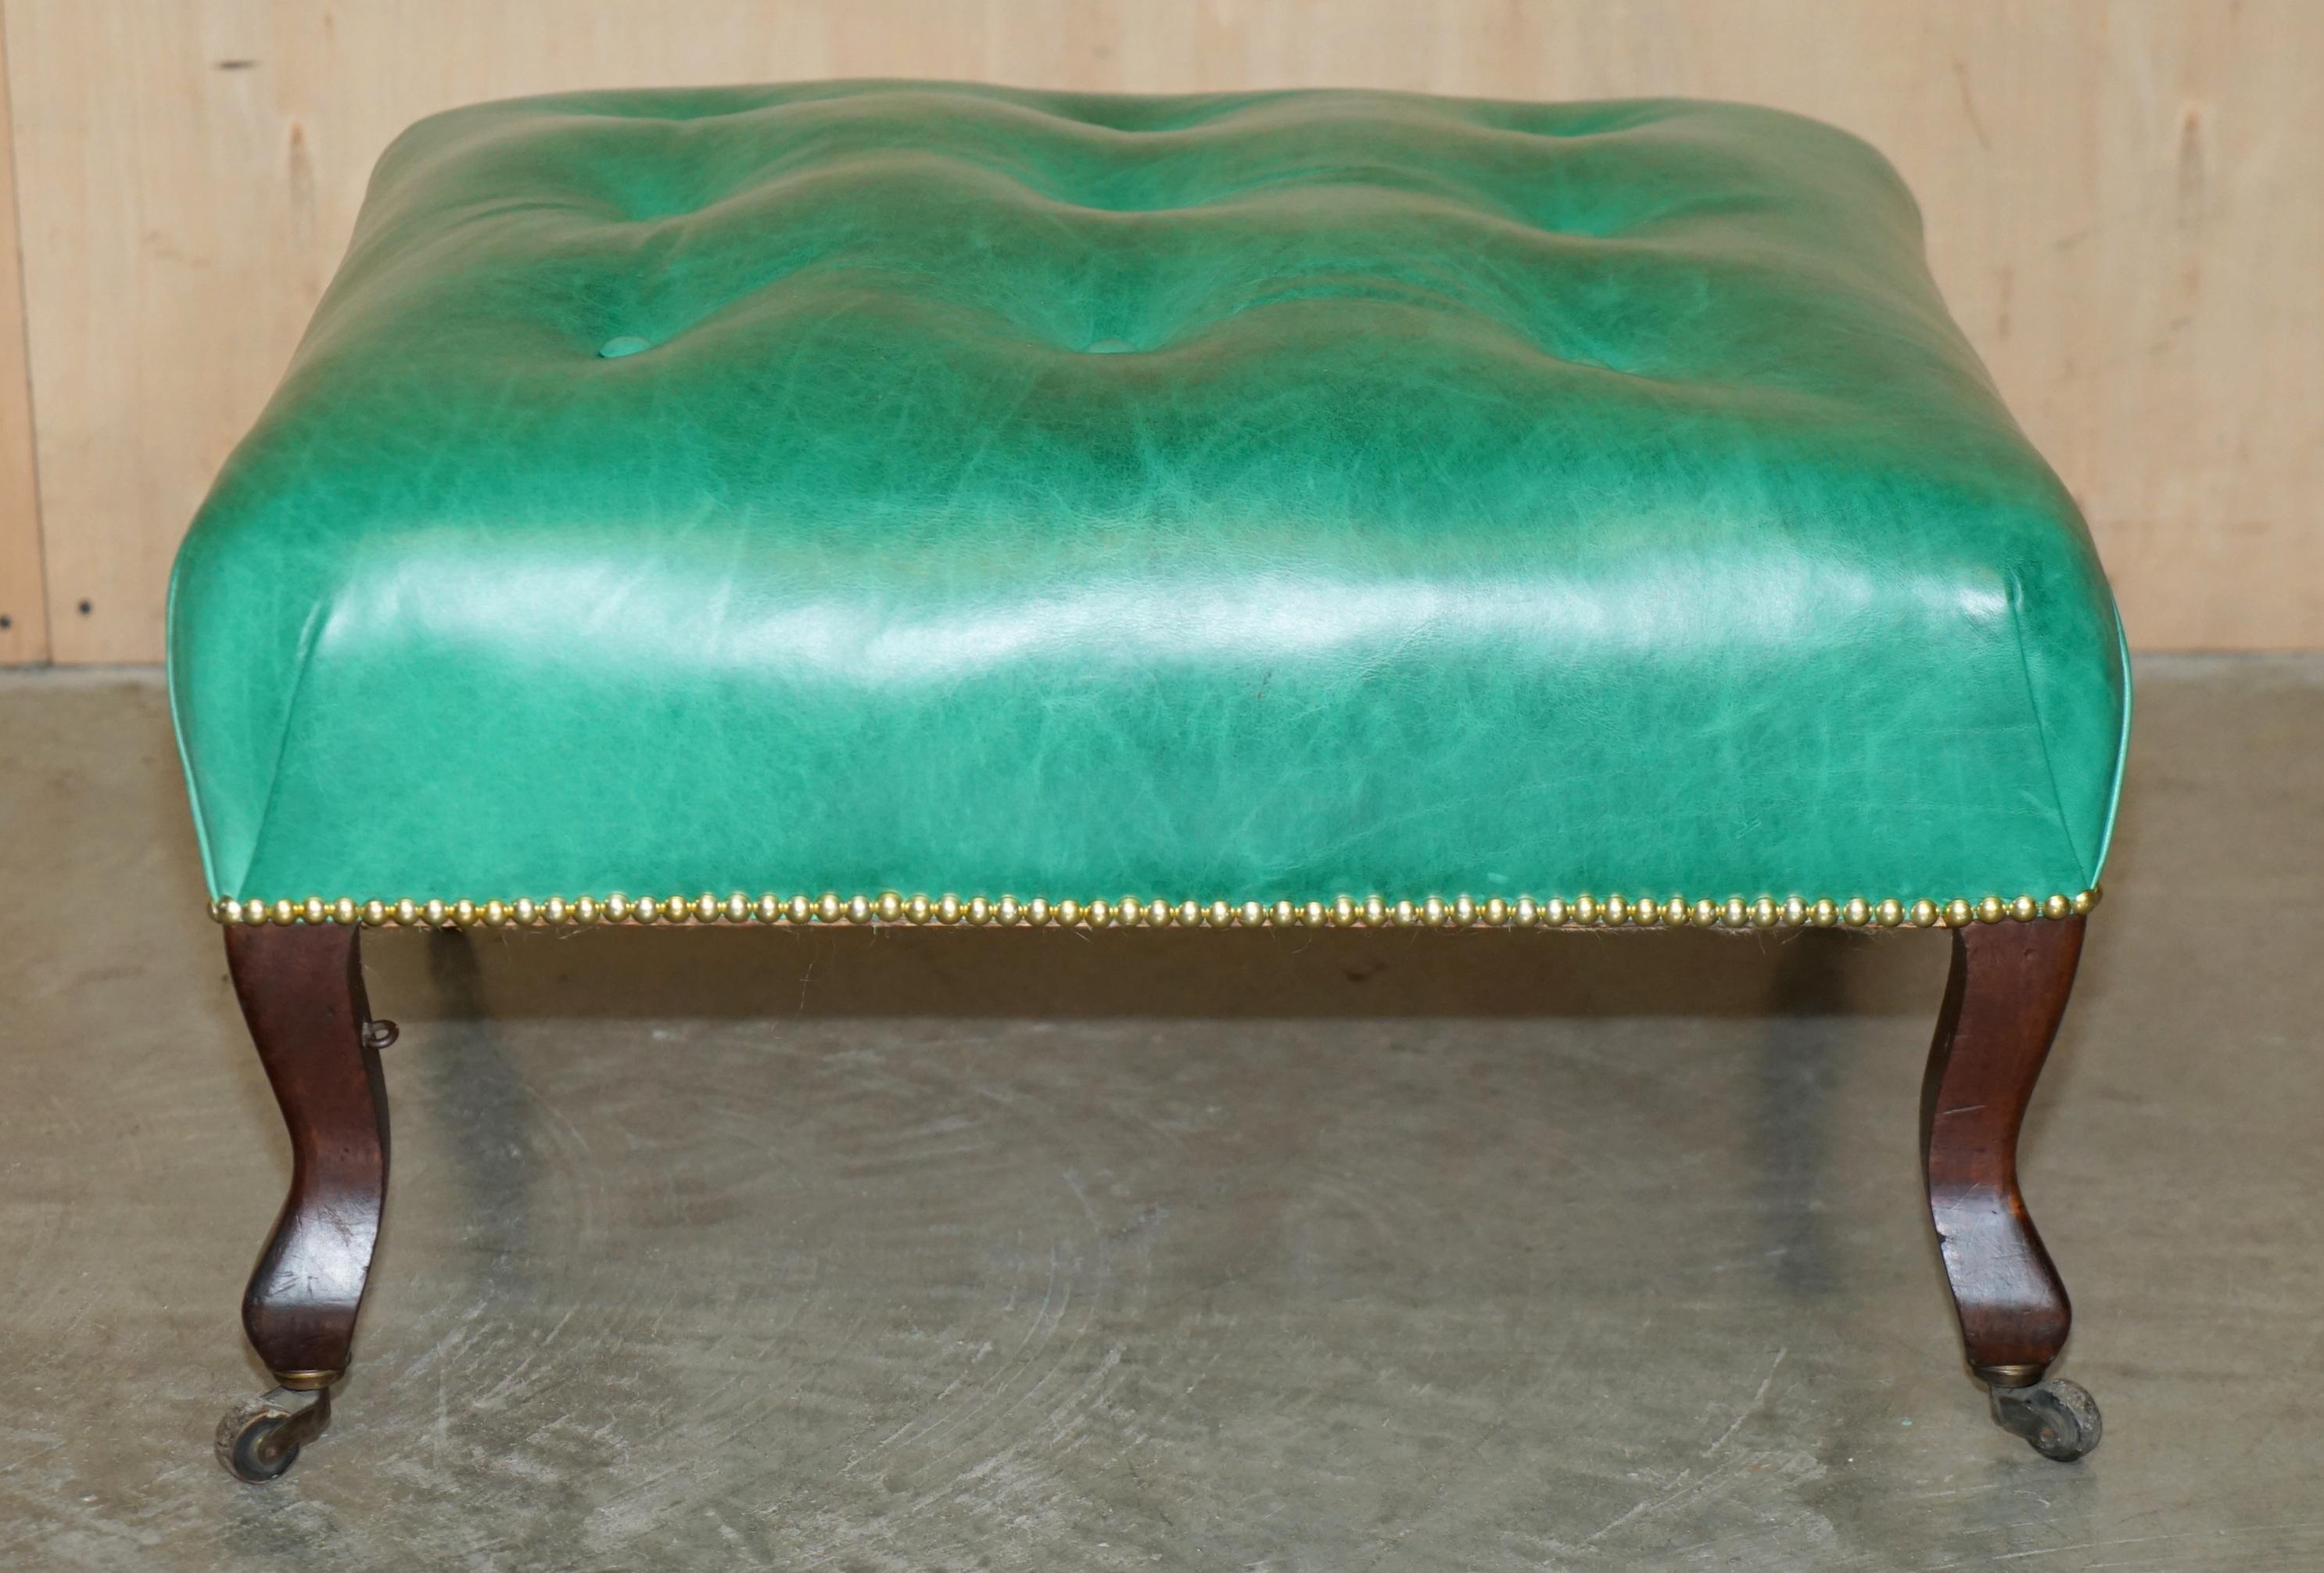 RARE ANTIQUE GEORGIAN 1760 CHESTERFIELD LEATHER FOOTSTOOL WiTH SLIP SERVING TRAY For Sale 11